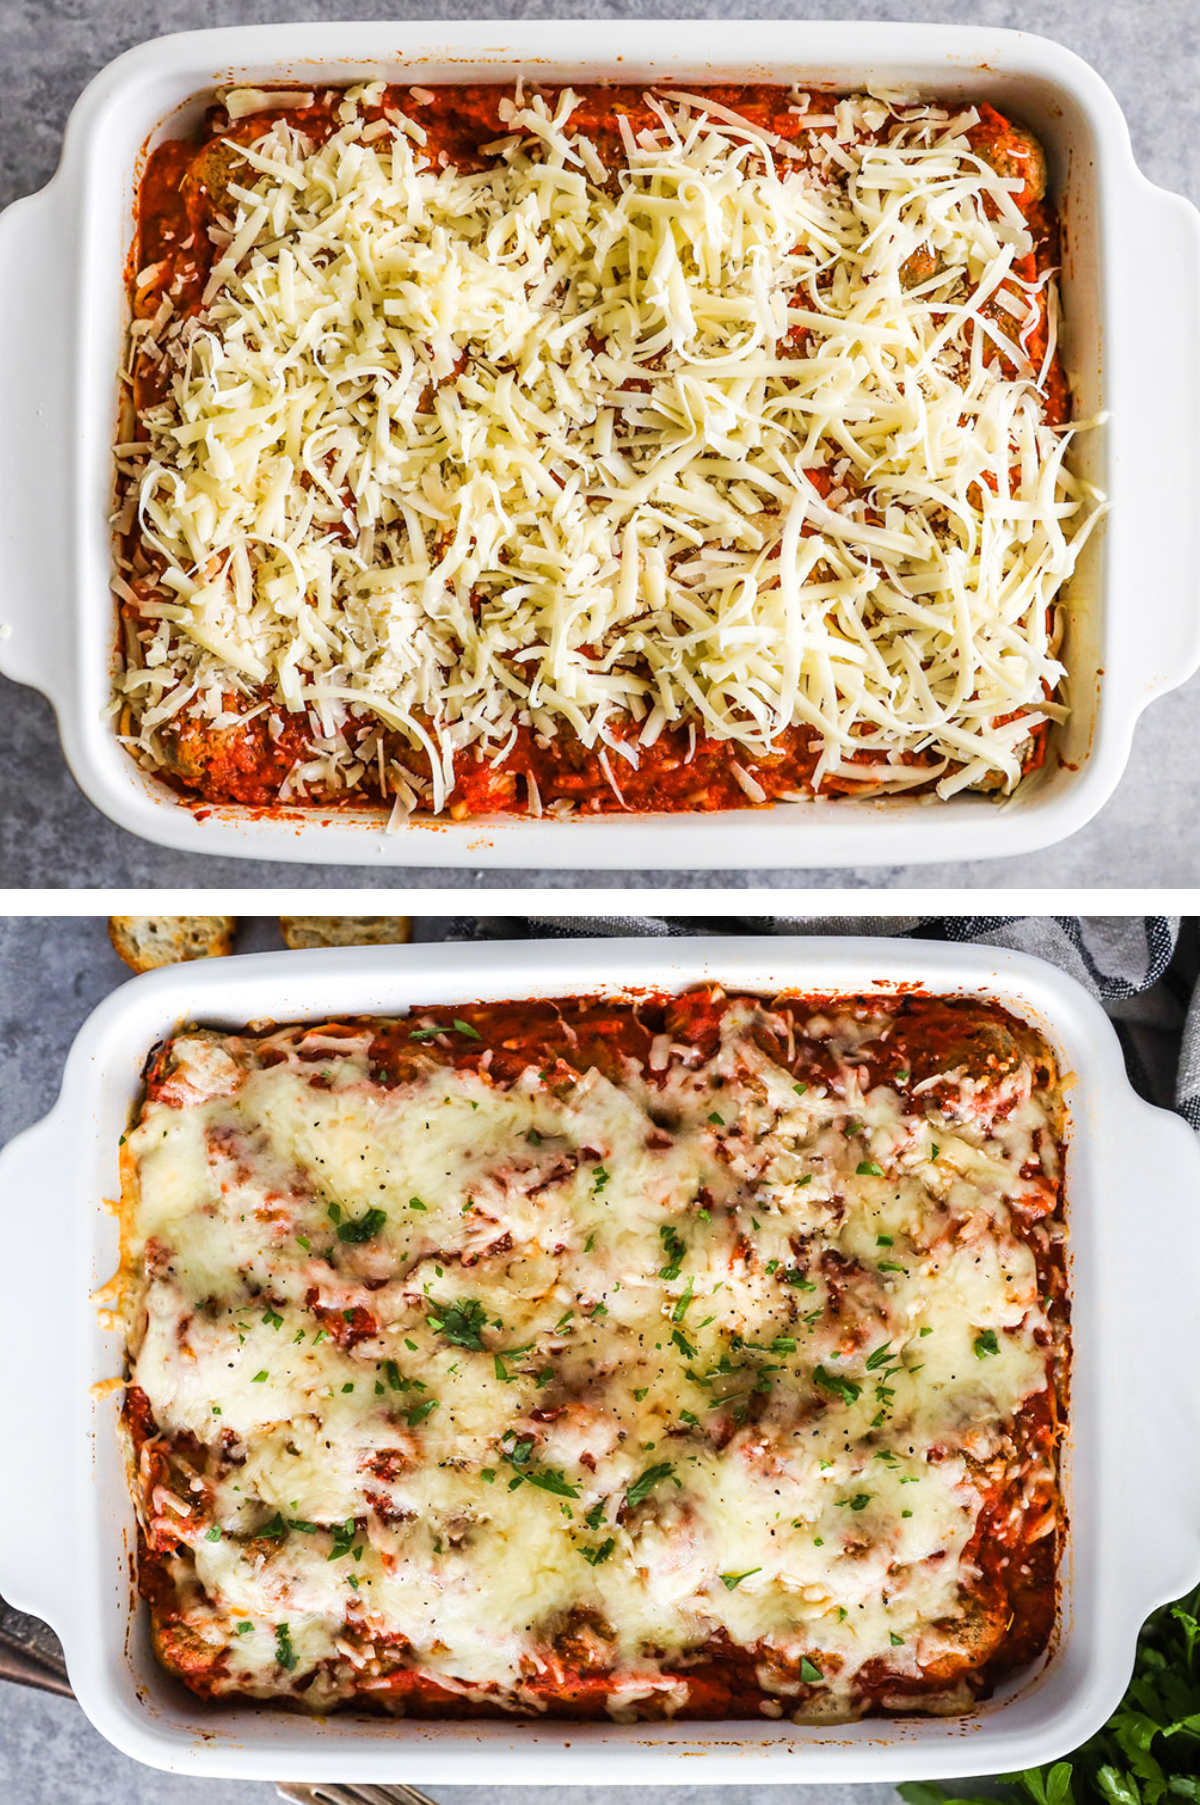 Two overhead images in one: 1. Cheese is added to the top of cooked spaghetti and meatballs. 2. Spaghetti and meatballs have melted cheese on top garnished with parsley. 